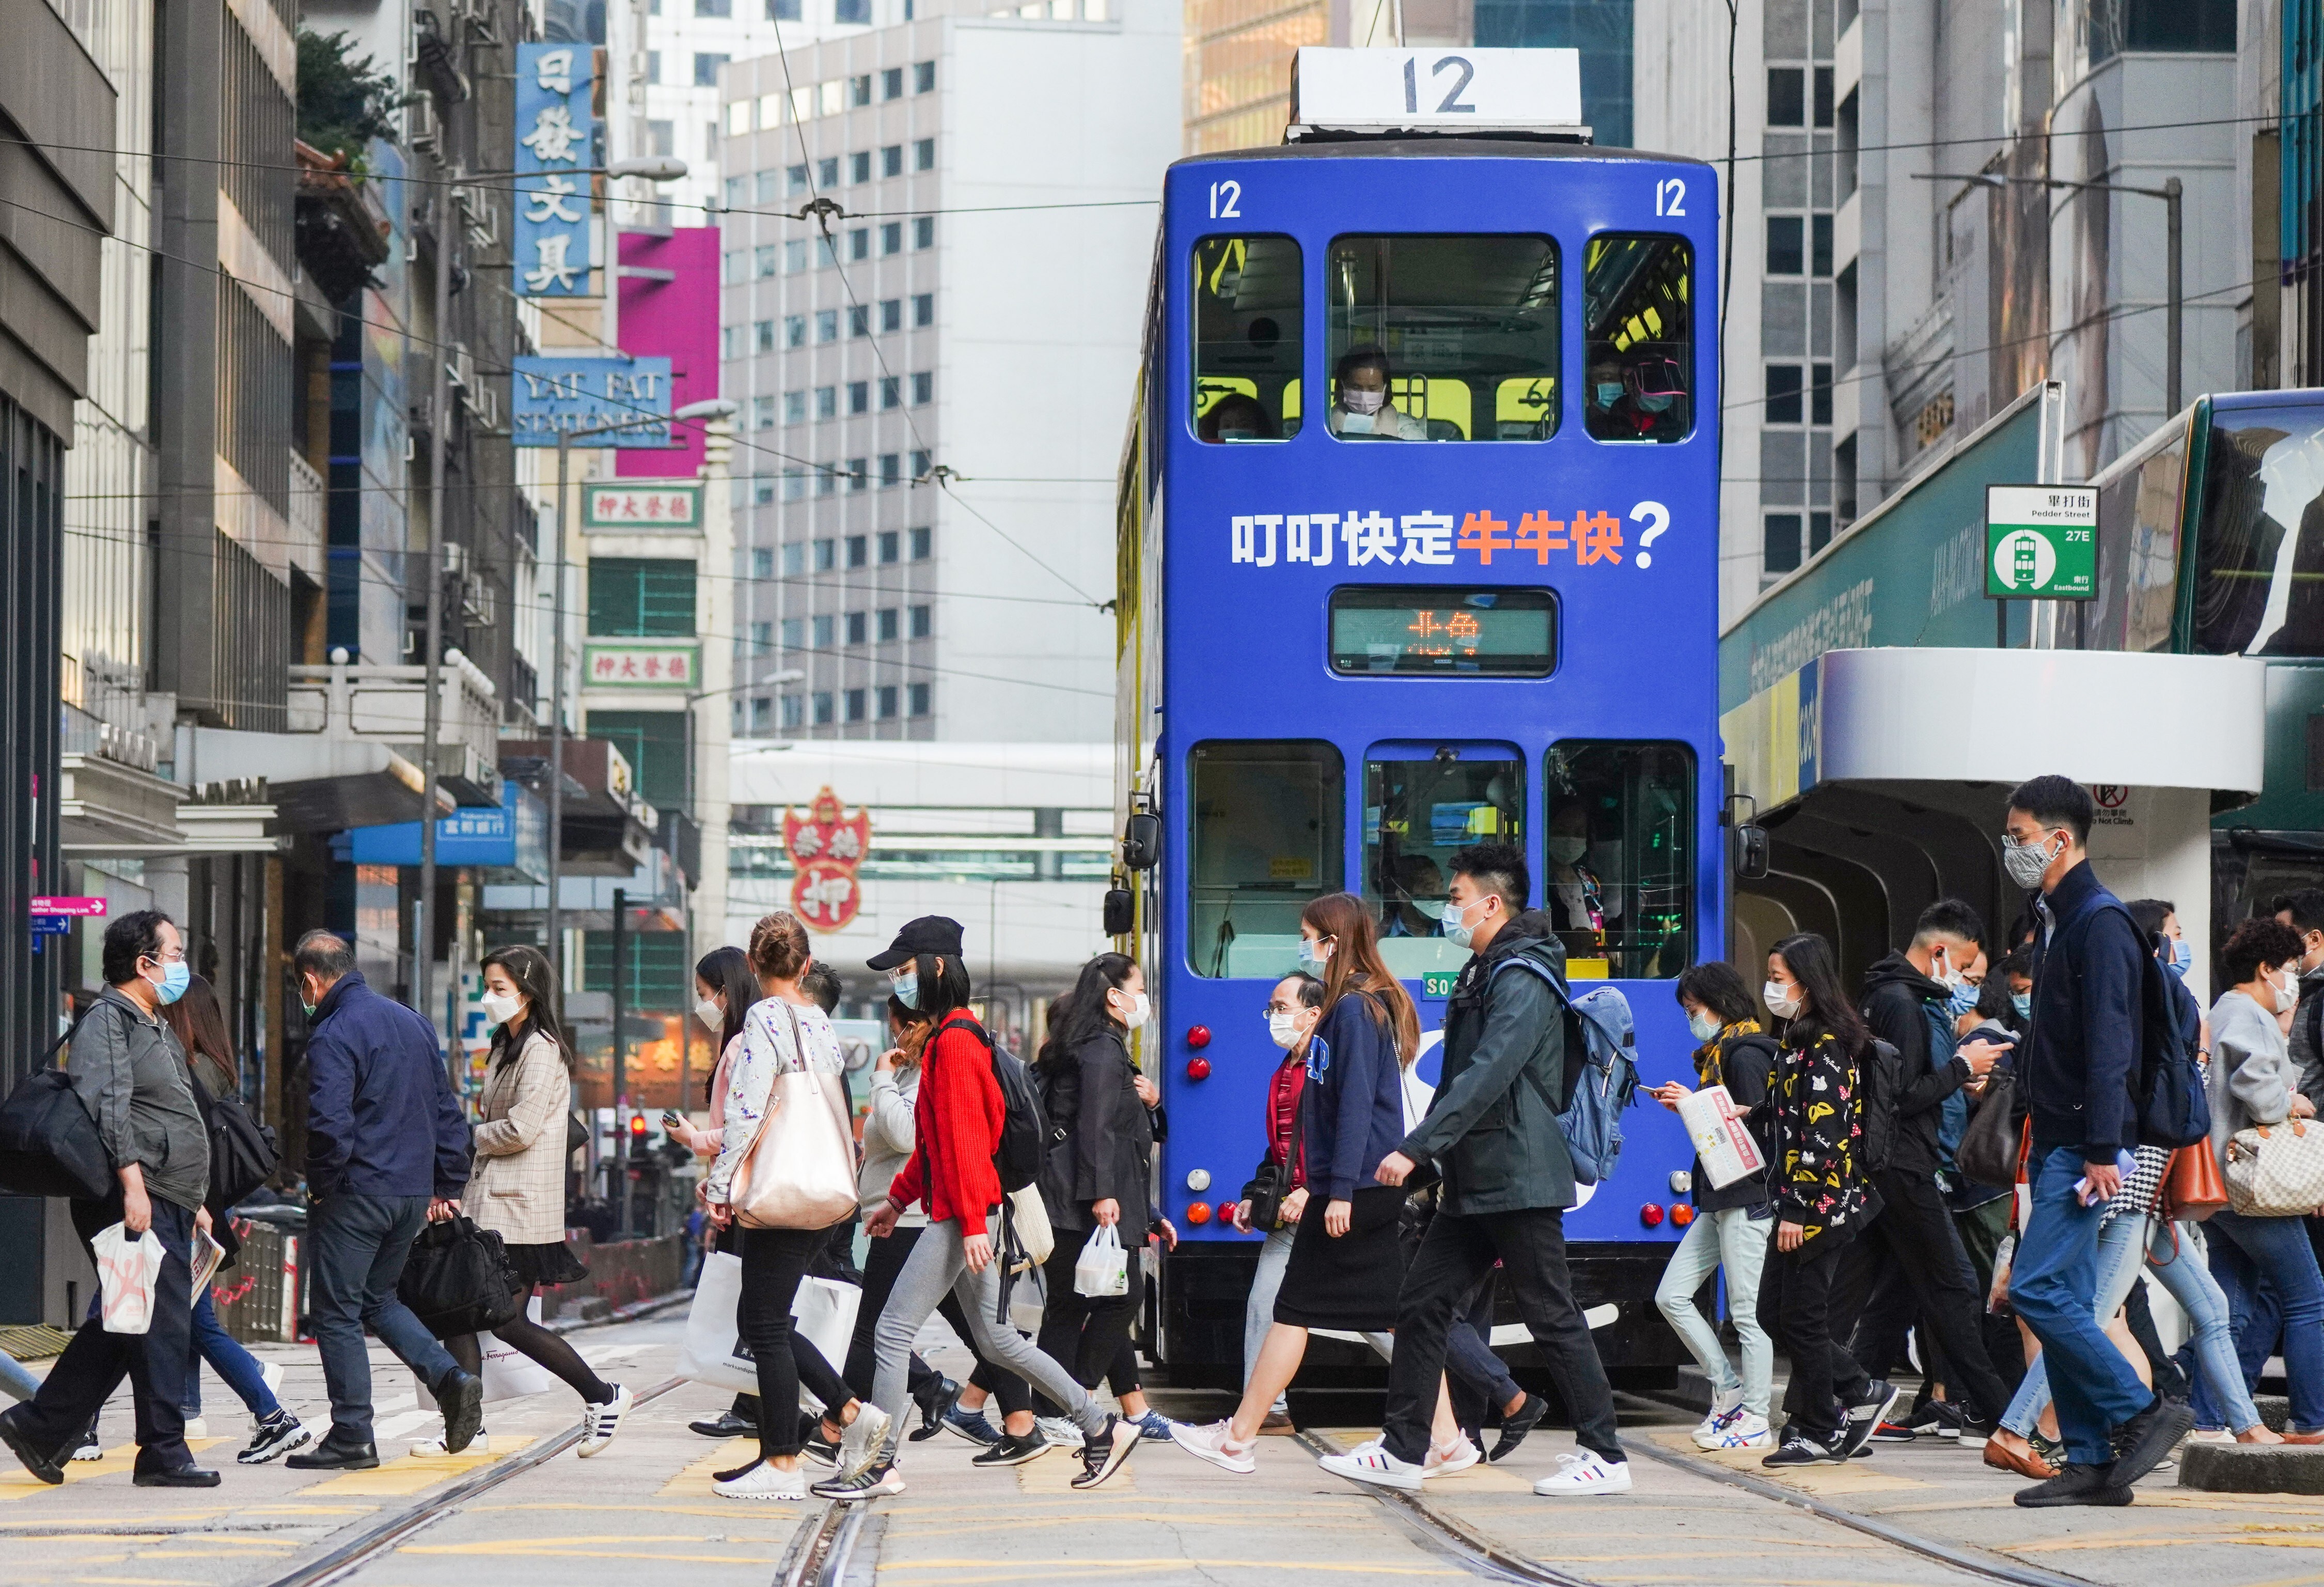 A new survey said almost a quarter of university-educated Hongkongers under the age of 35 planned to leave the city to work. Photo: Sam Tsang